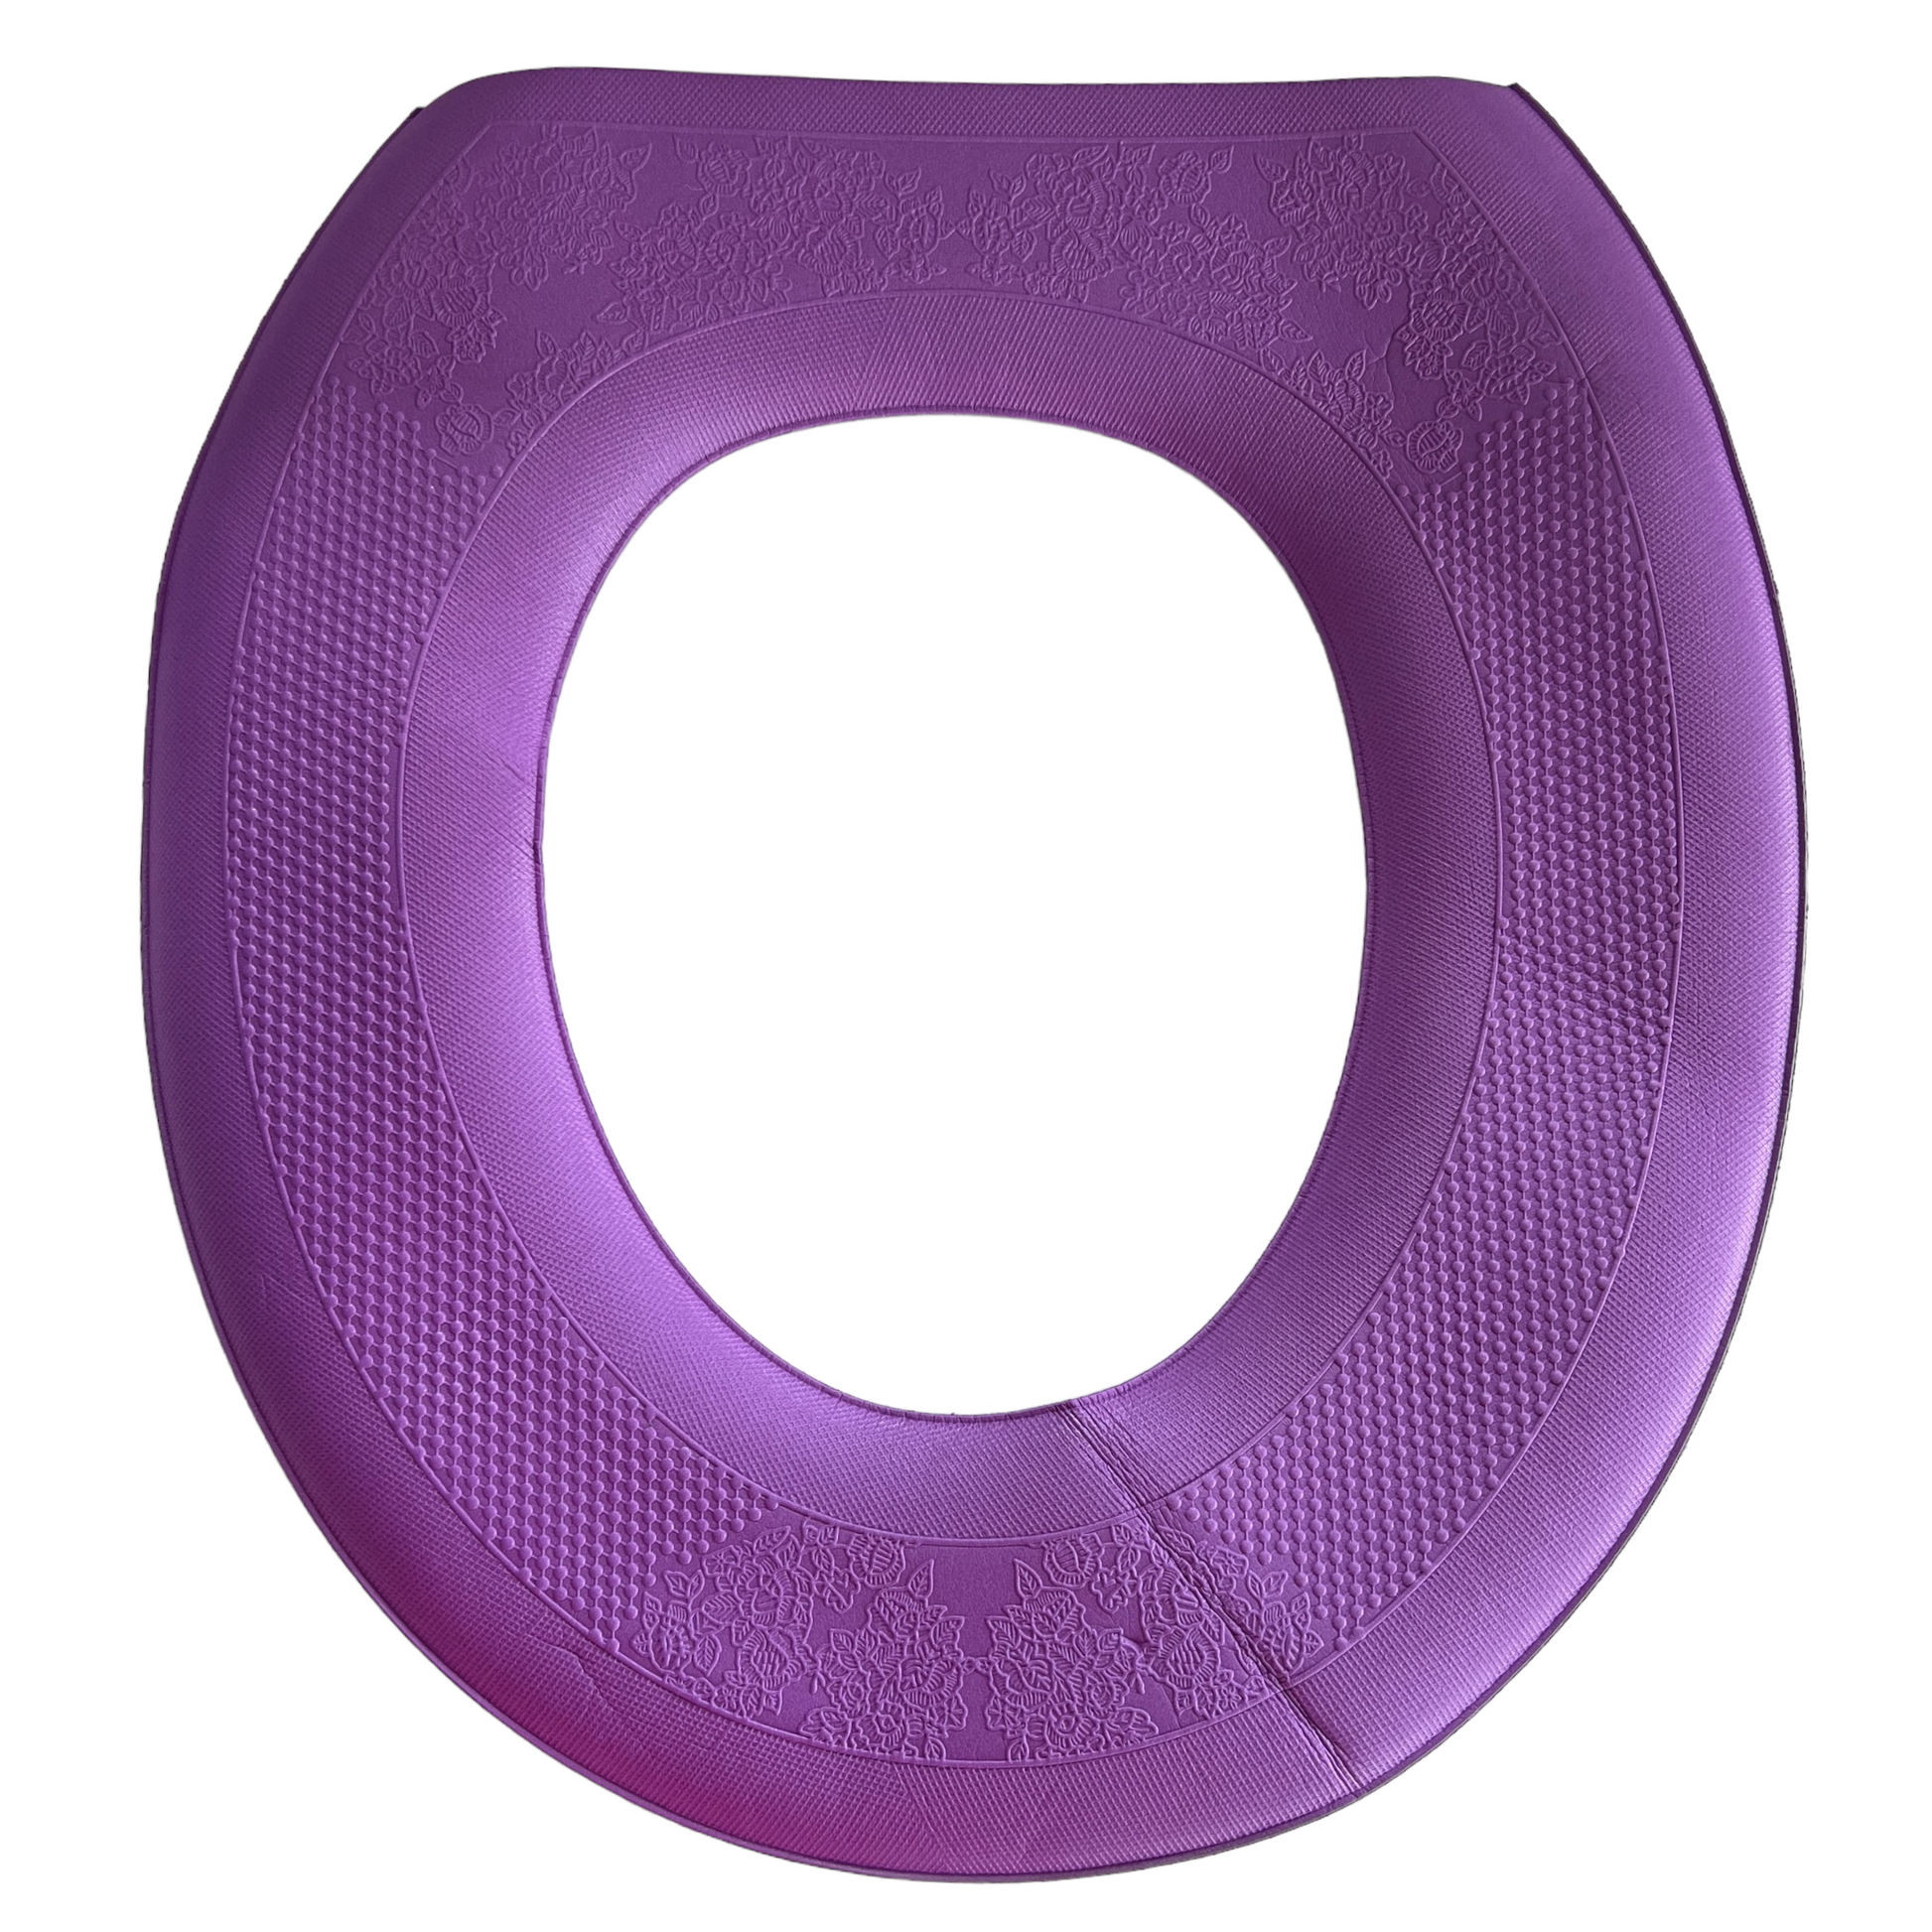 Padded Toilet Seat Identifying Cover Toilet Seat Covers SPIRIT SPARKPLUGS Purple  